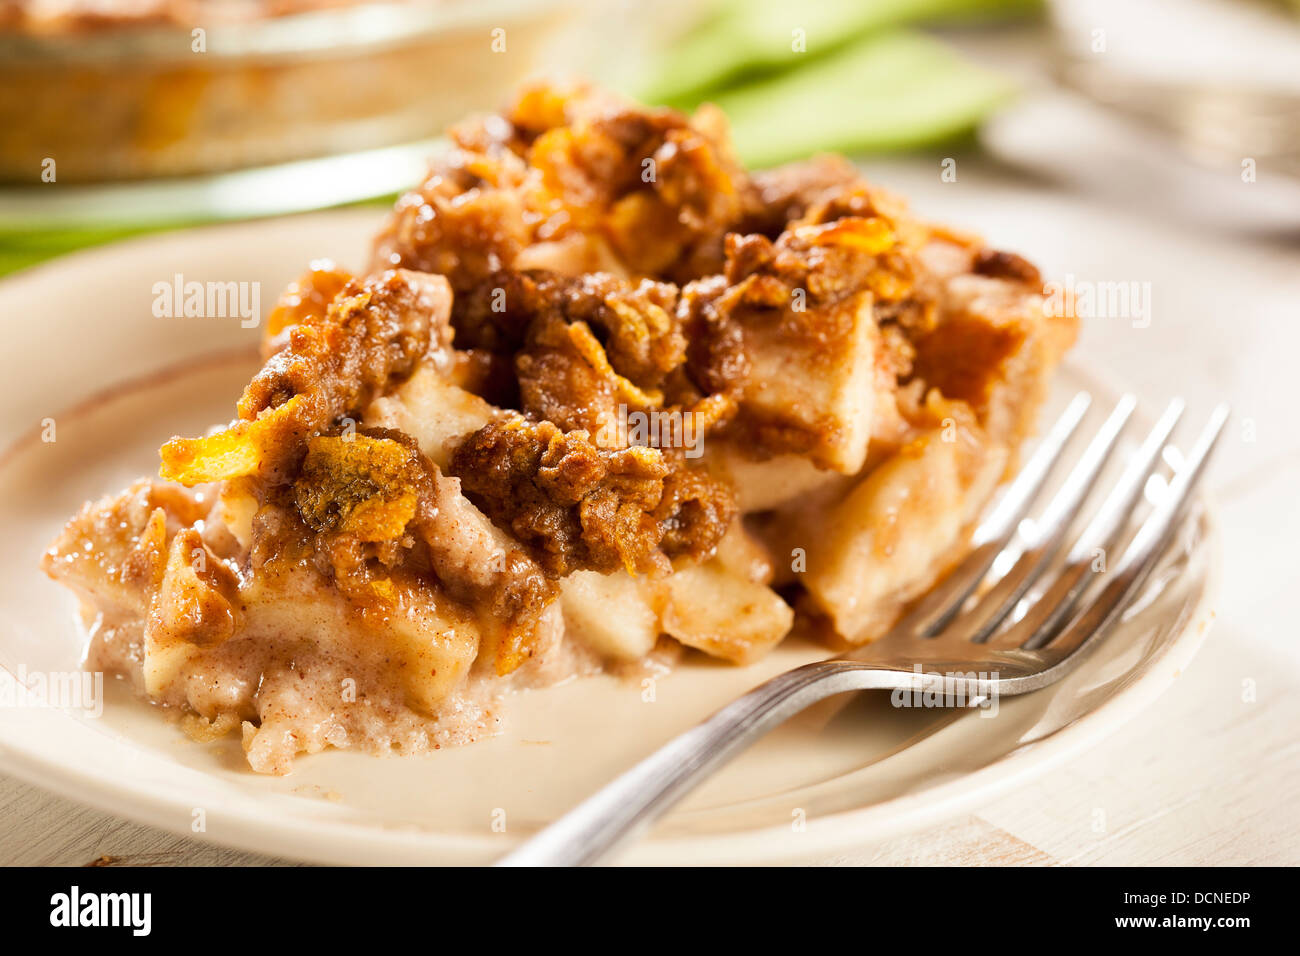 Homemade Apple Pie Dessert with a Crumble Top Stock Photo